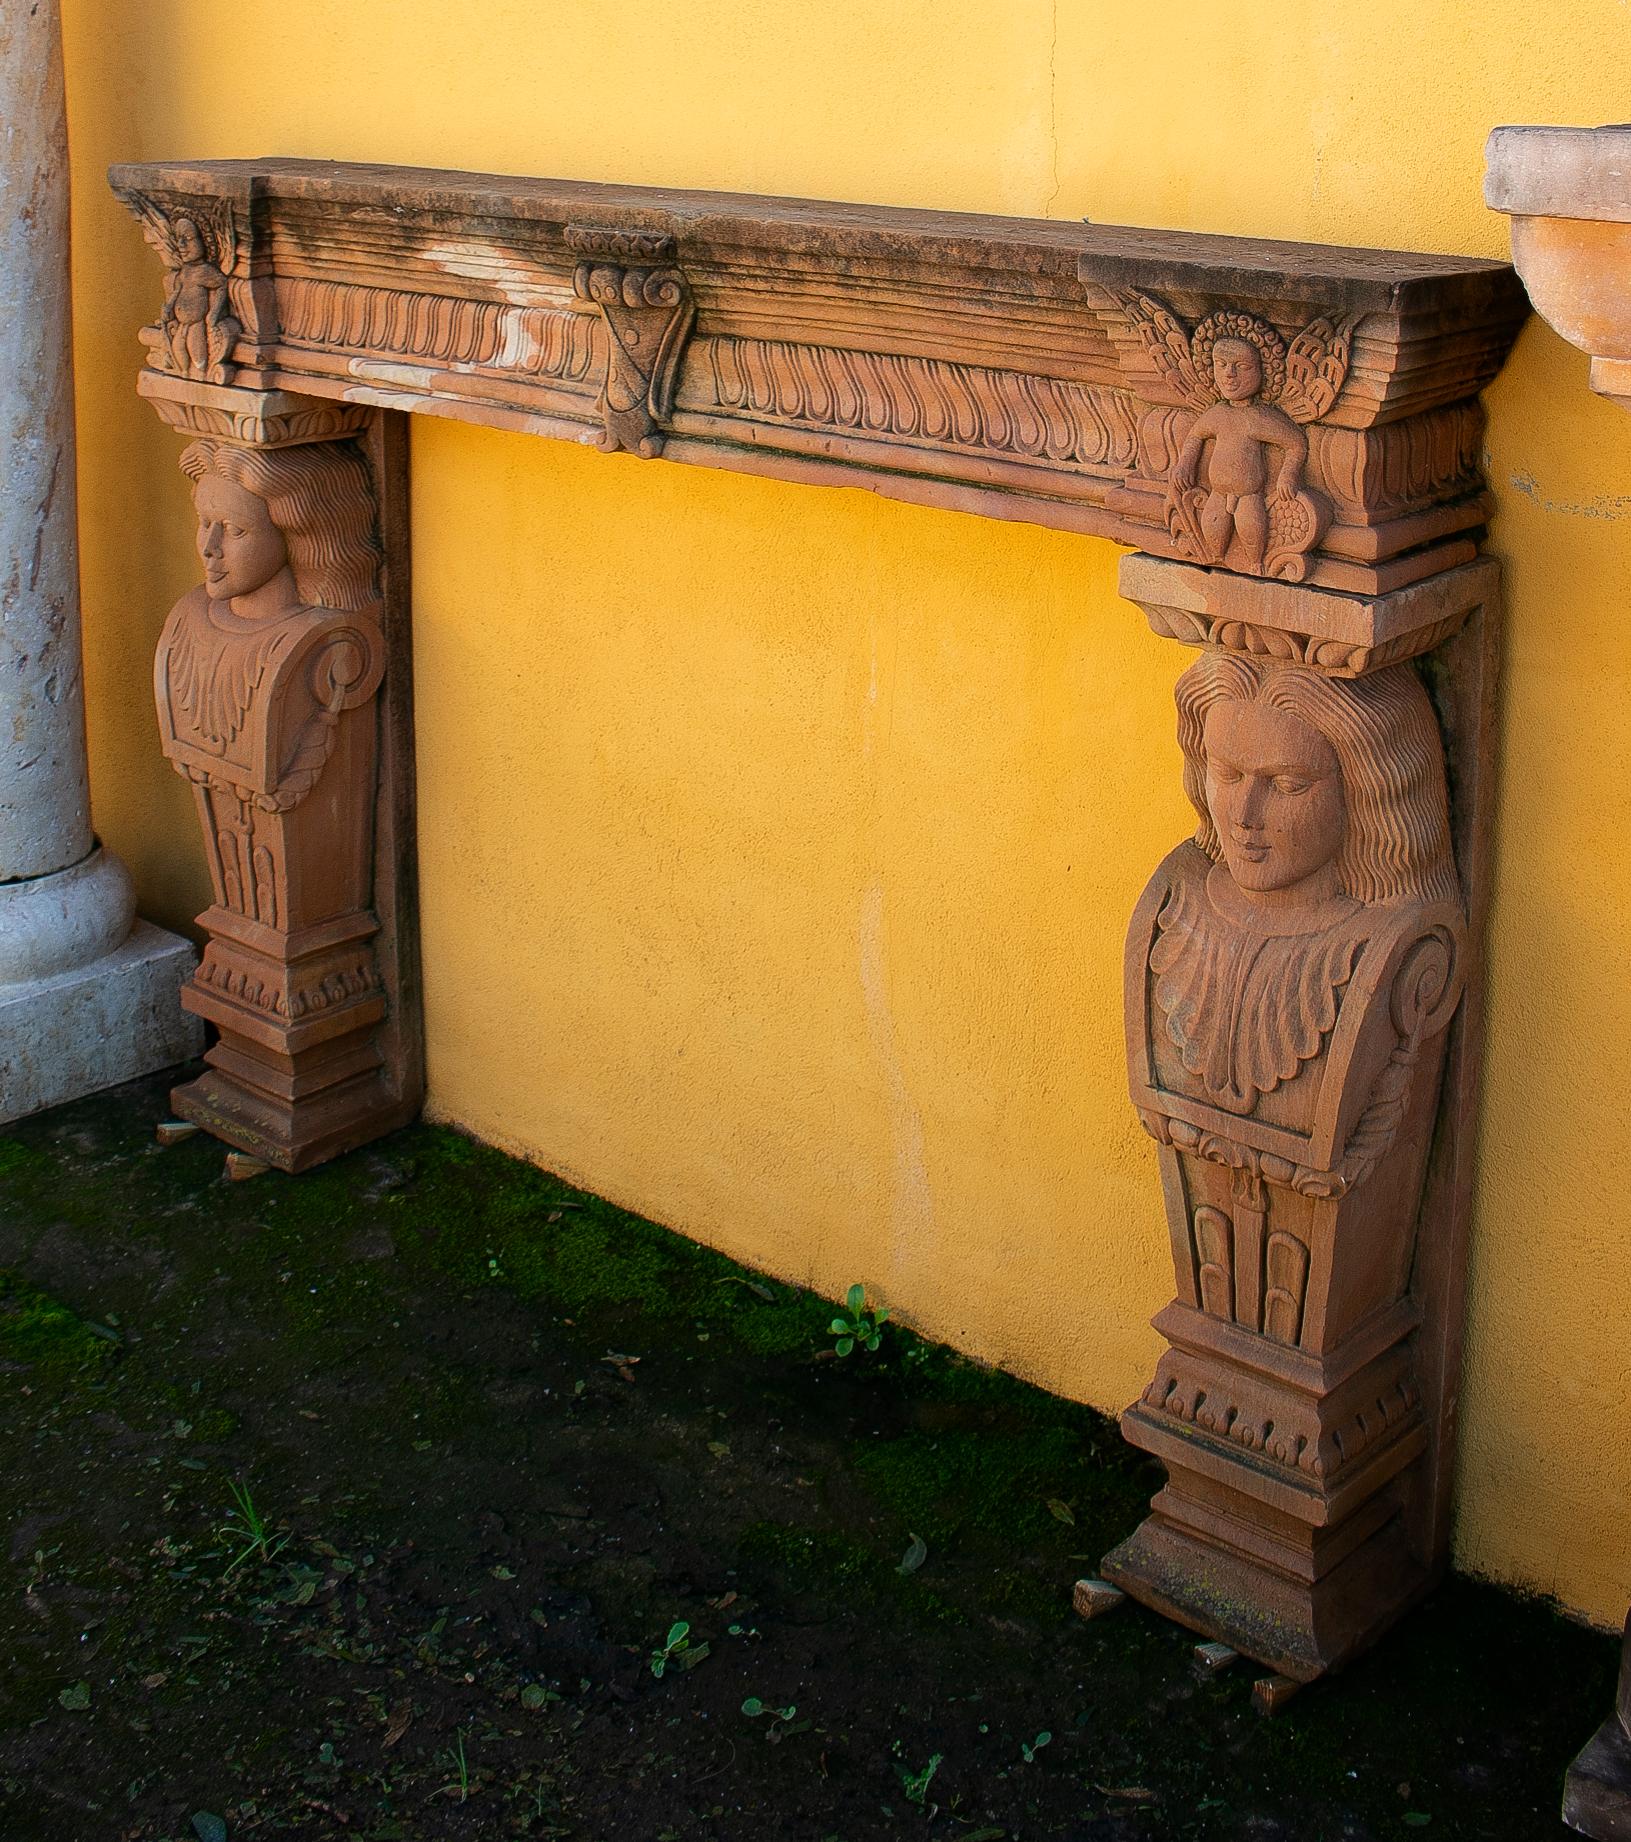 1990s Indian hand carved sandstone fireplace mantel (fireplace) with caryatid pilaster figure sculptures and geometric bas-relief decorations. 

Opening dimensions: 103 x 125cm.